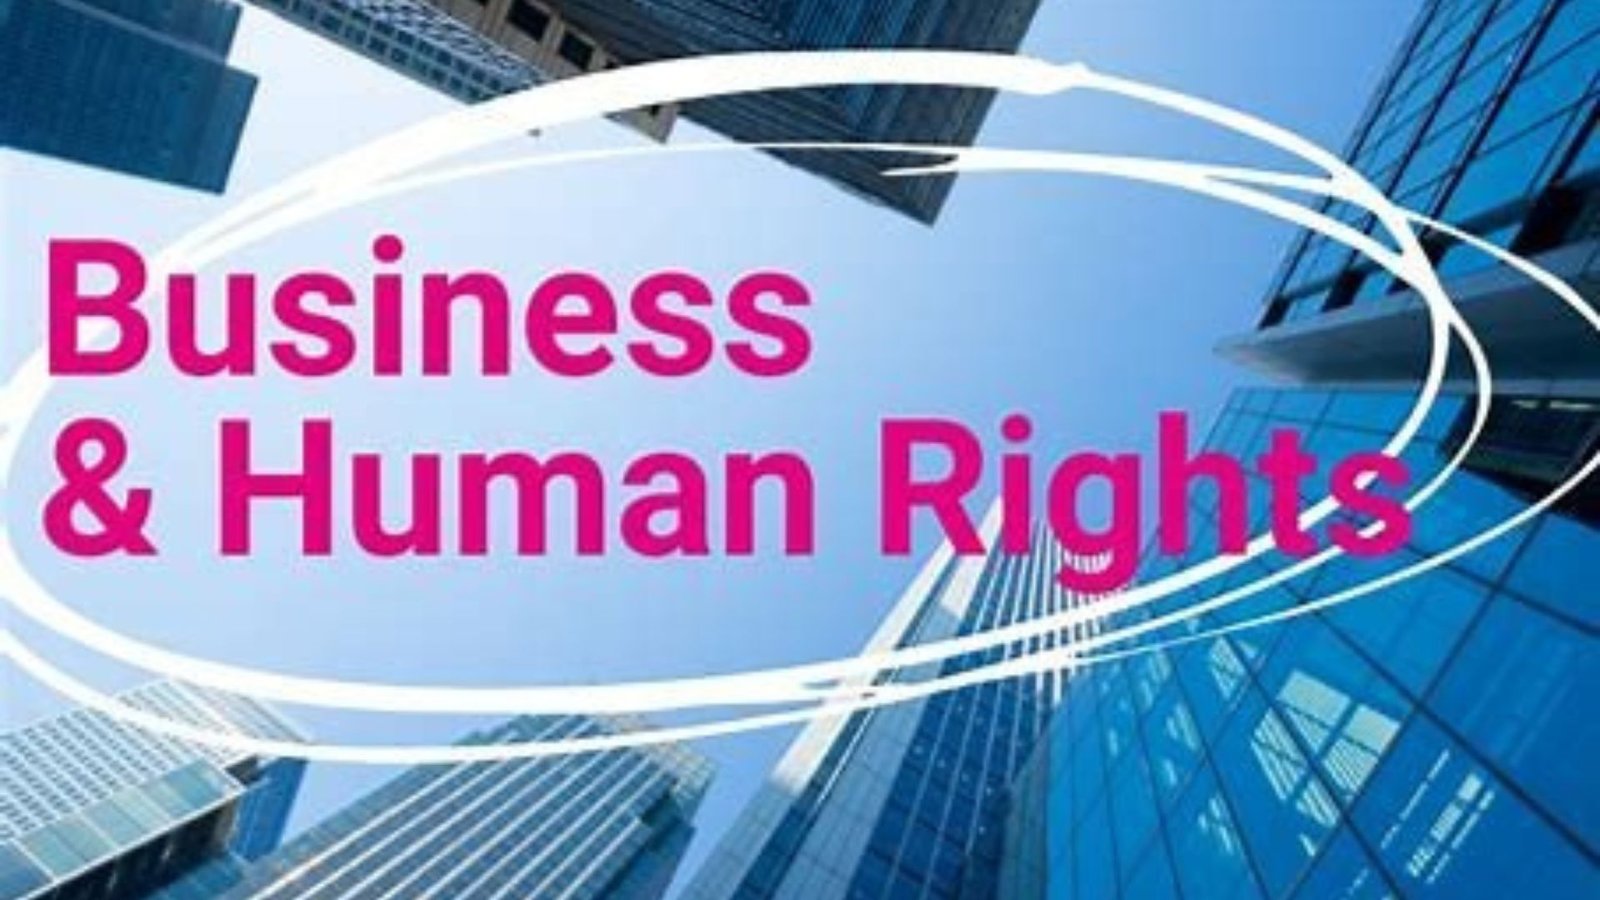 A cover page with business and human rights written on top of it.